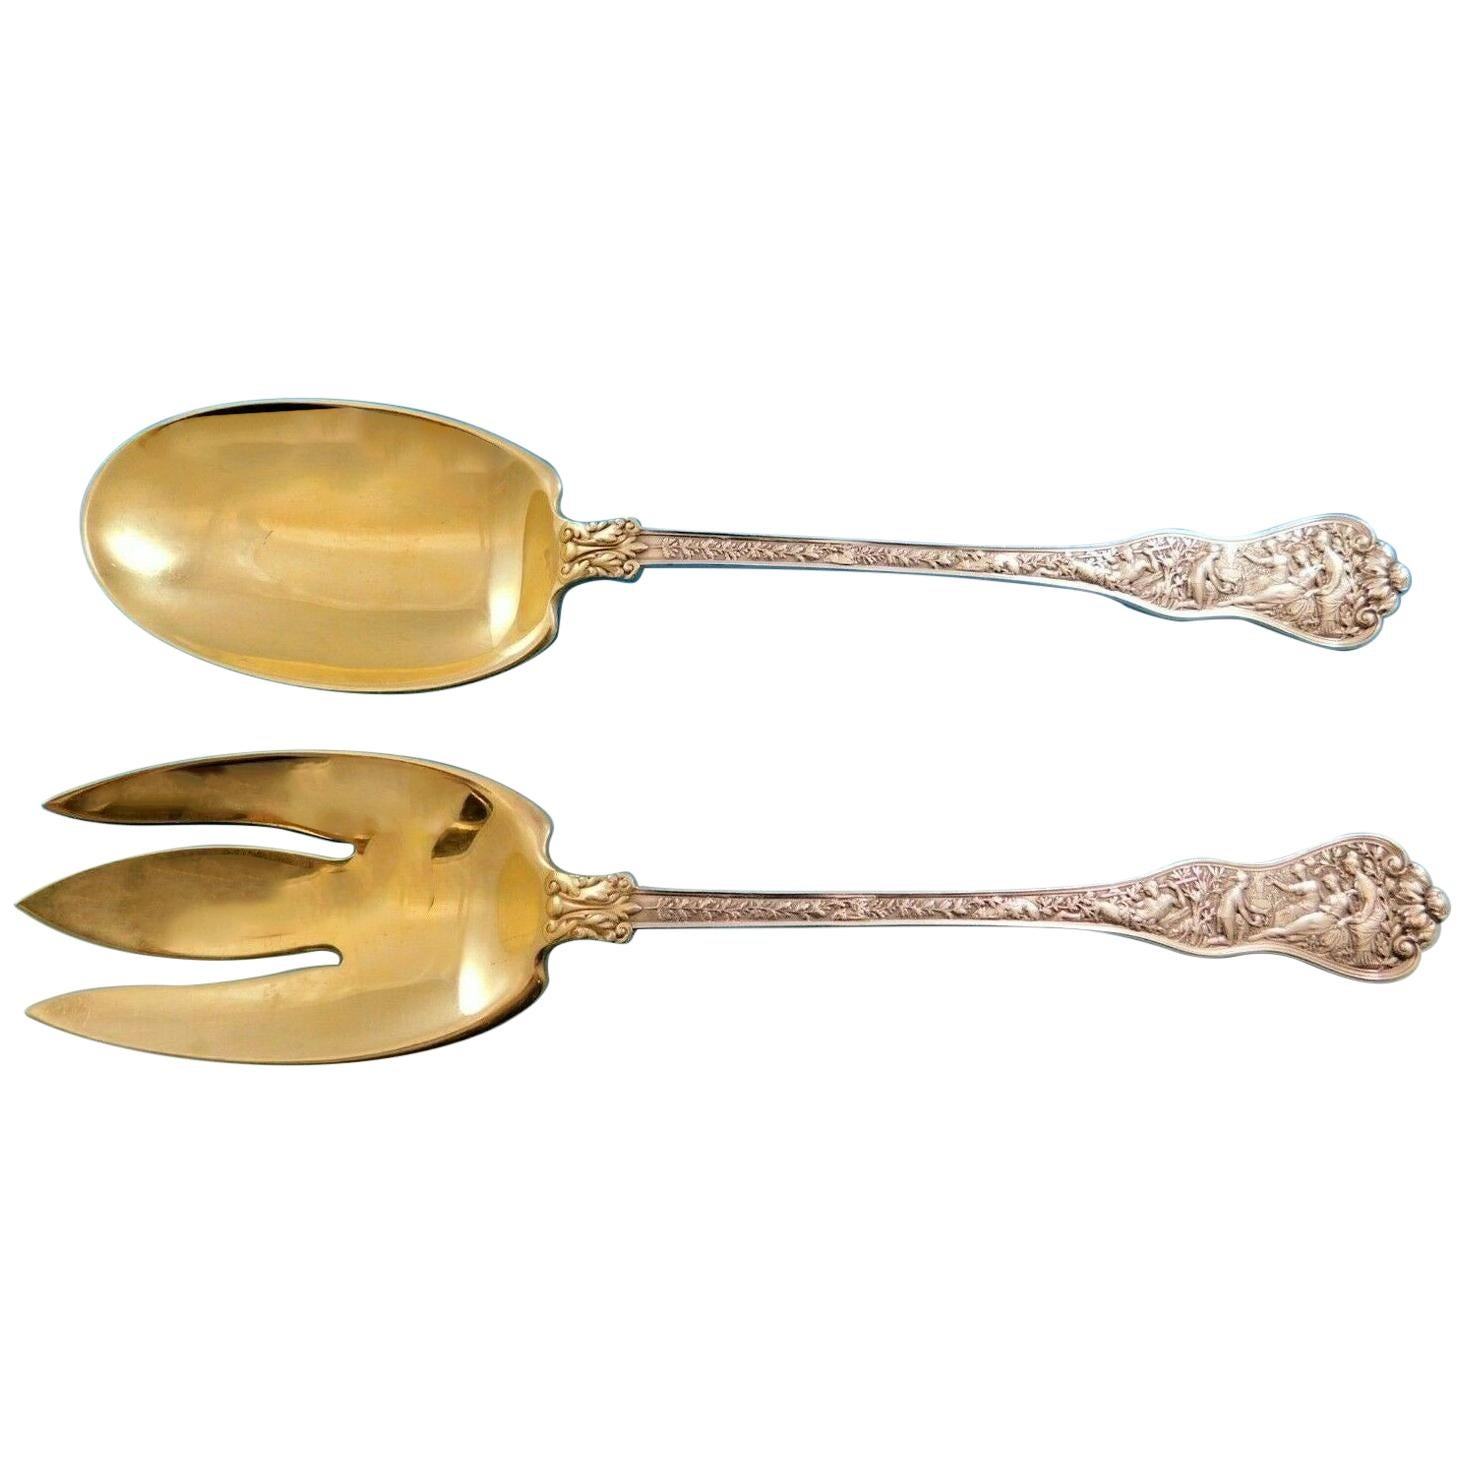 Olympian by Tiffany & Co Sterling Silver Salad Serving Set Gold Washed